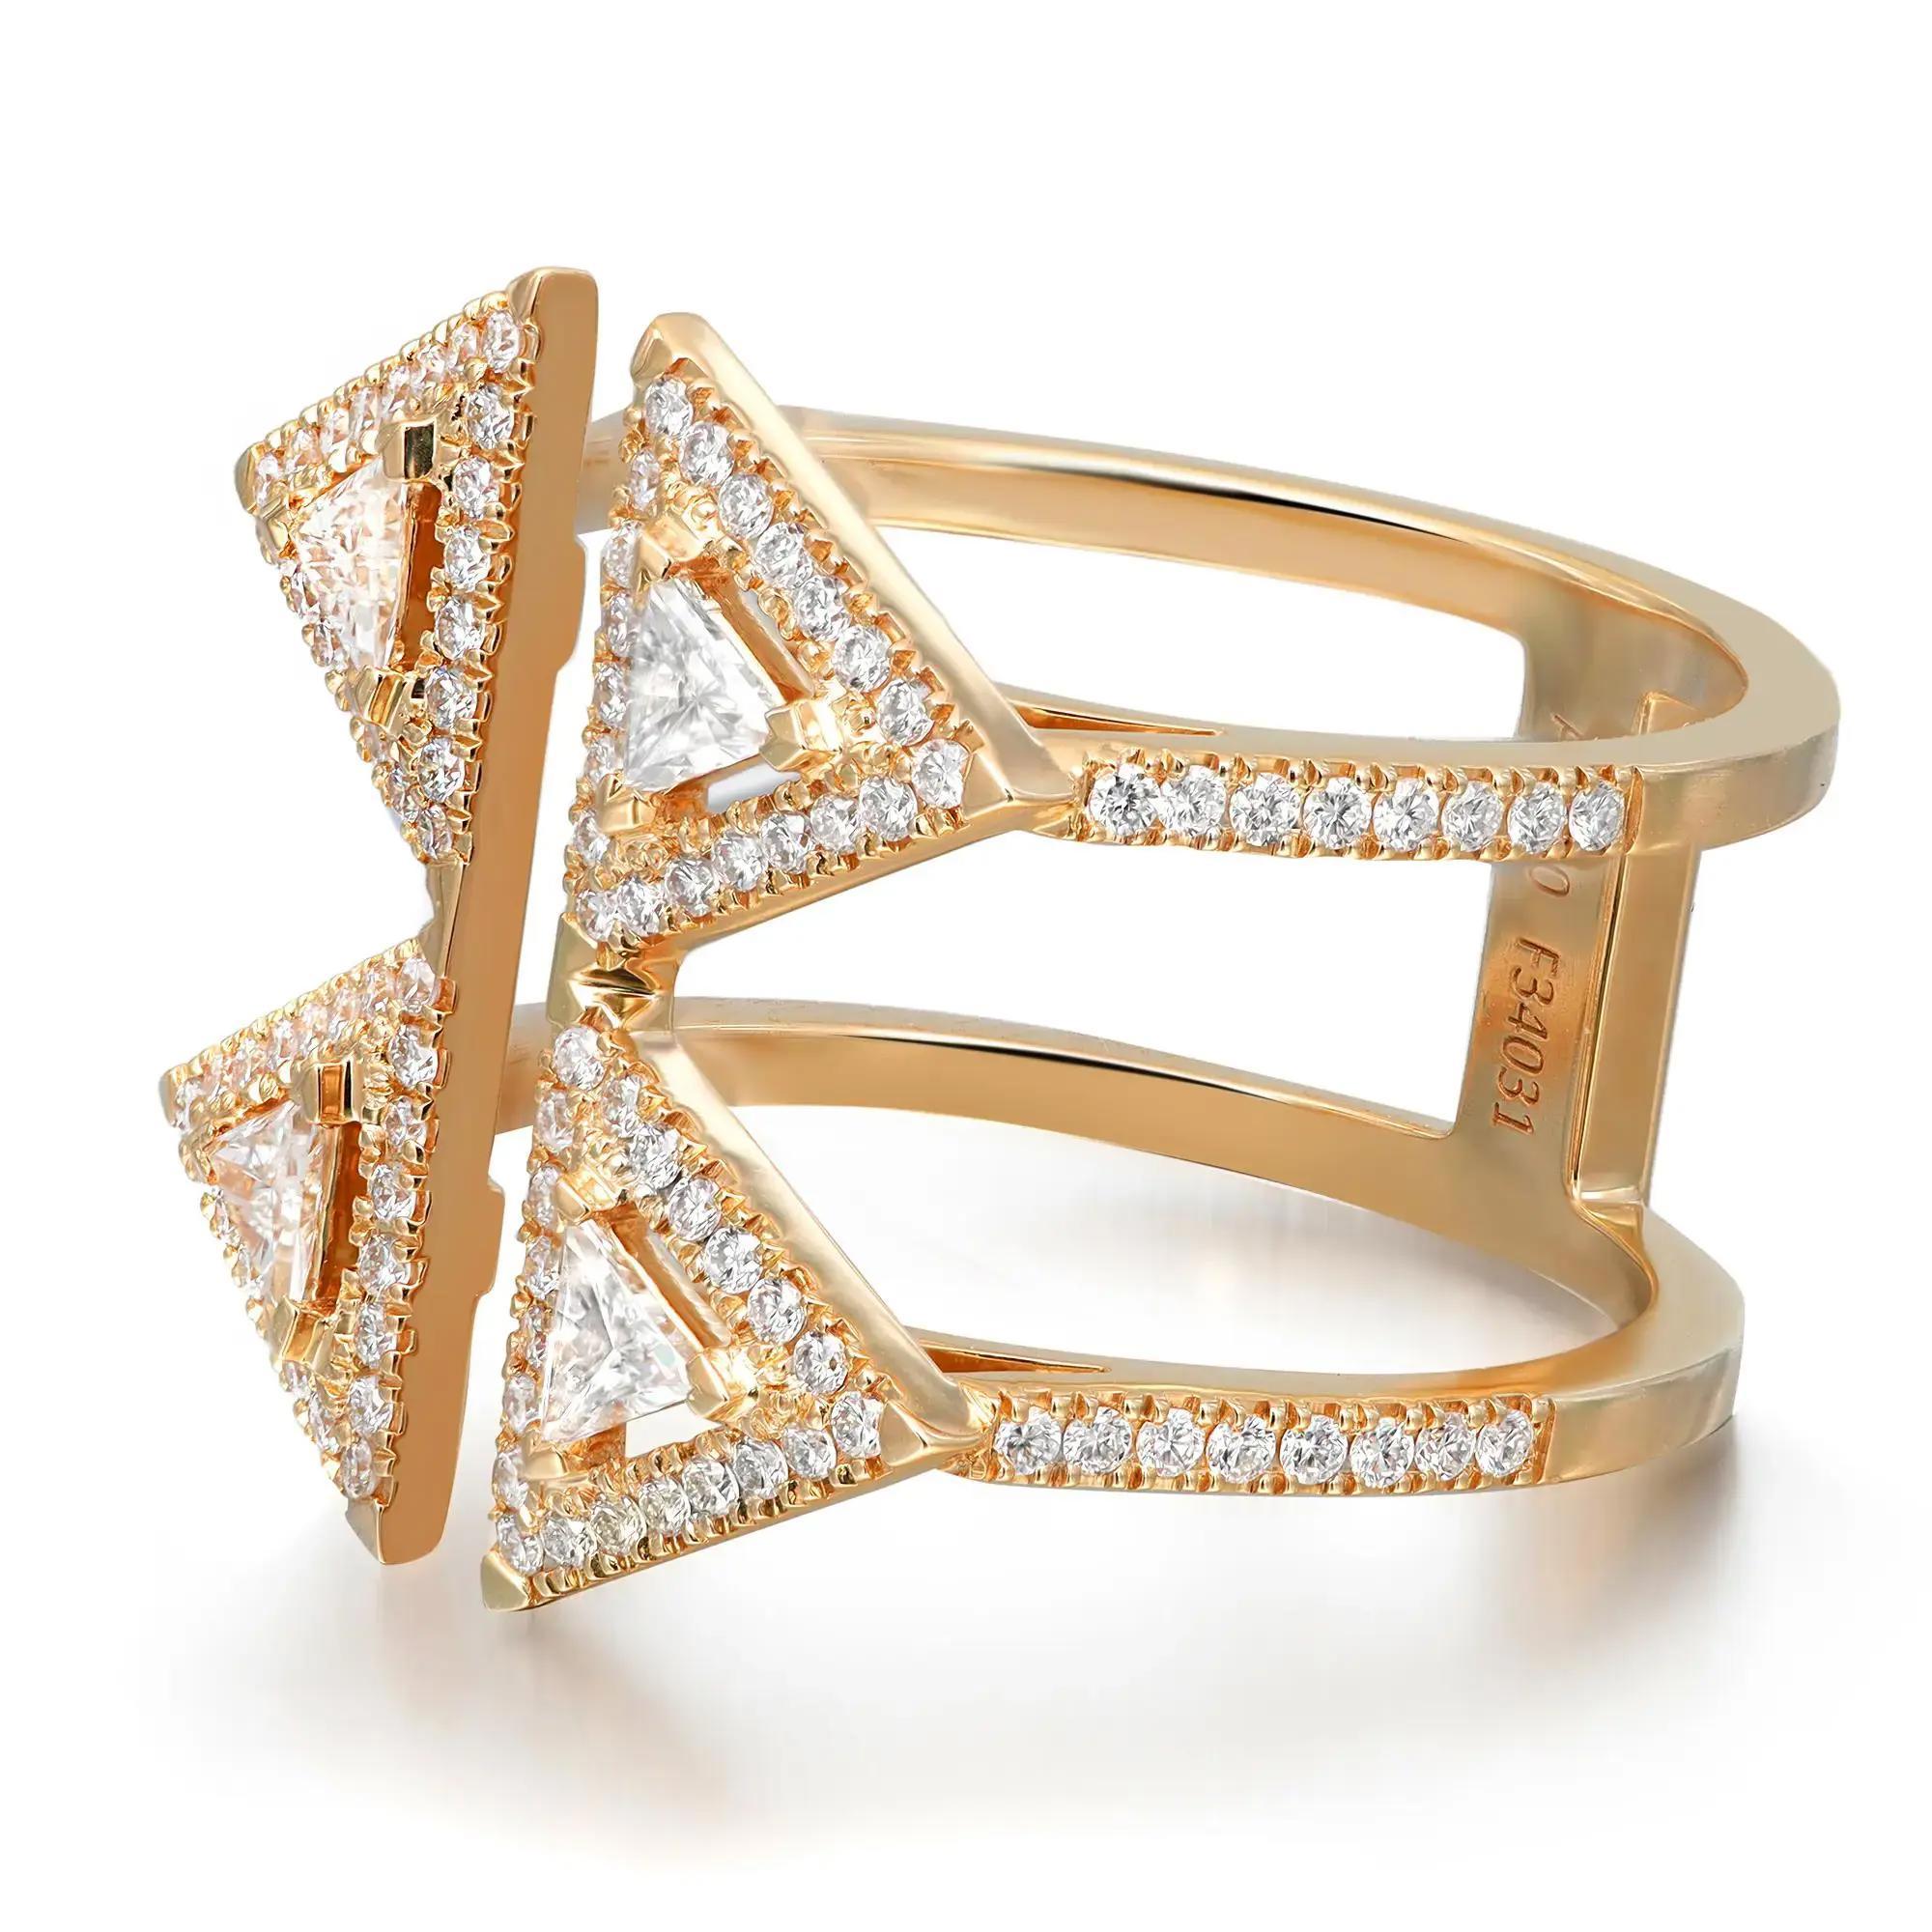 Unique and stylish, Messika Thea Toi & Moi diamond ring. Crafted in lustrous 18K yellow gold. This wide cocktail band ring features four triangular diamonds framed in a round cut diamond halo in pave setting with diamond accents on both sides. Total